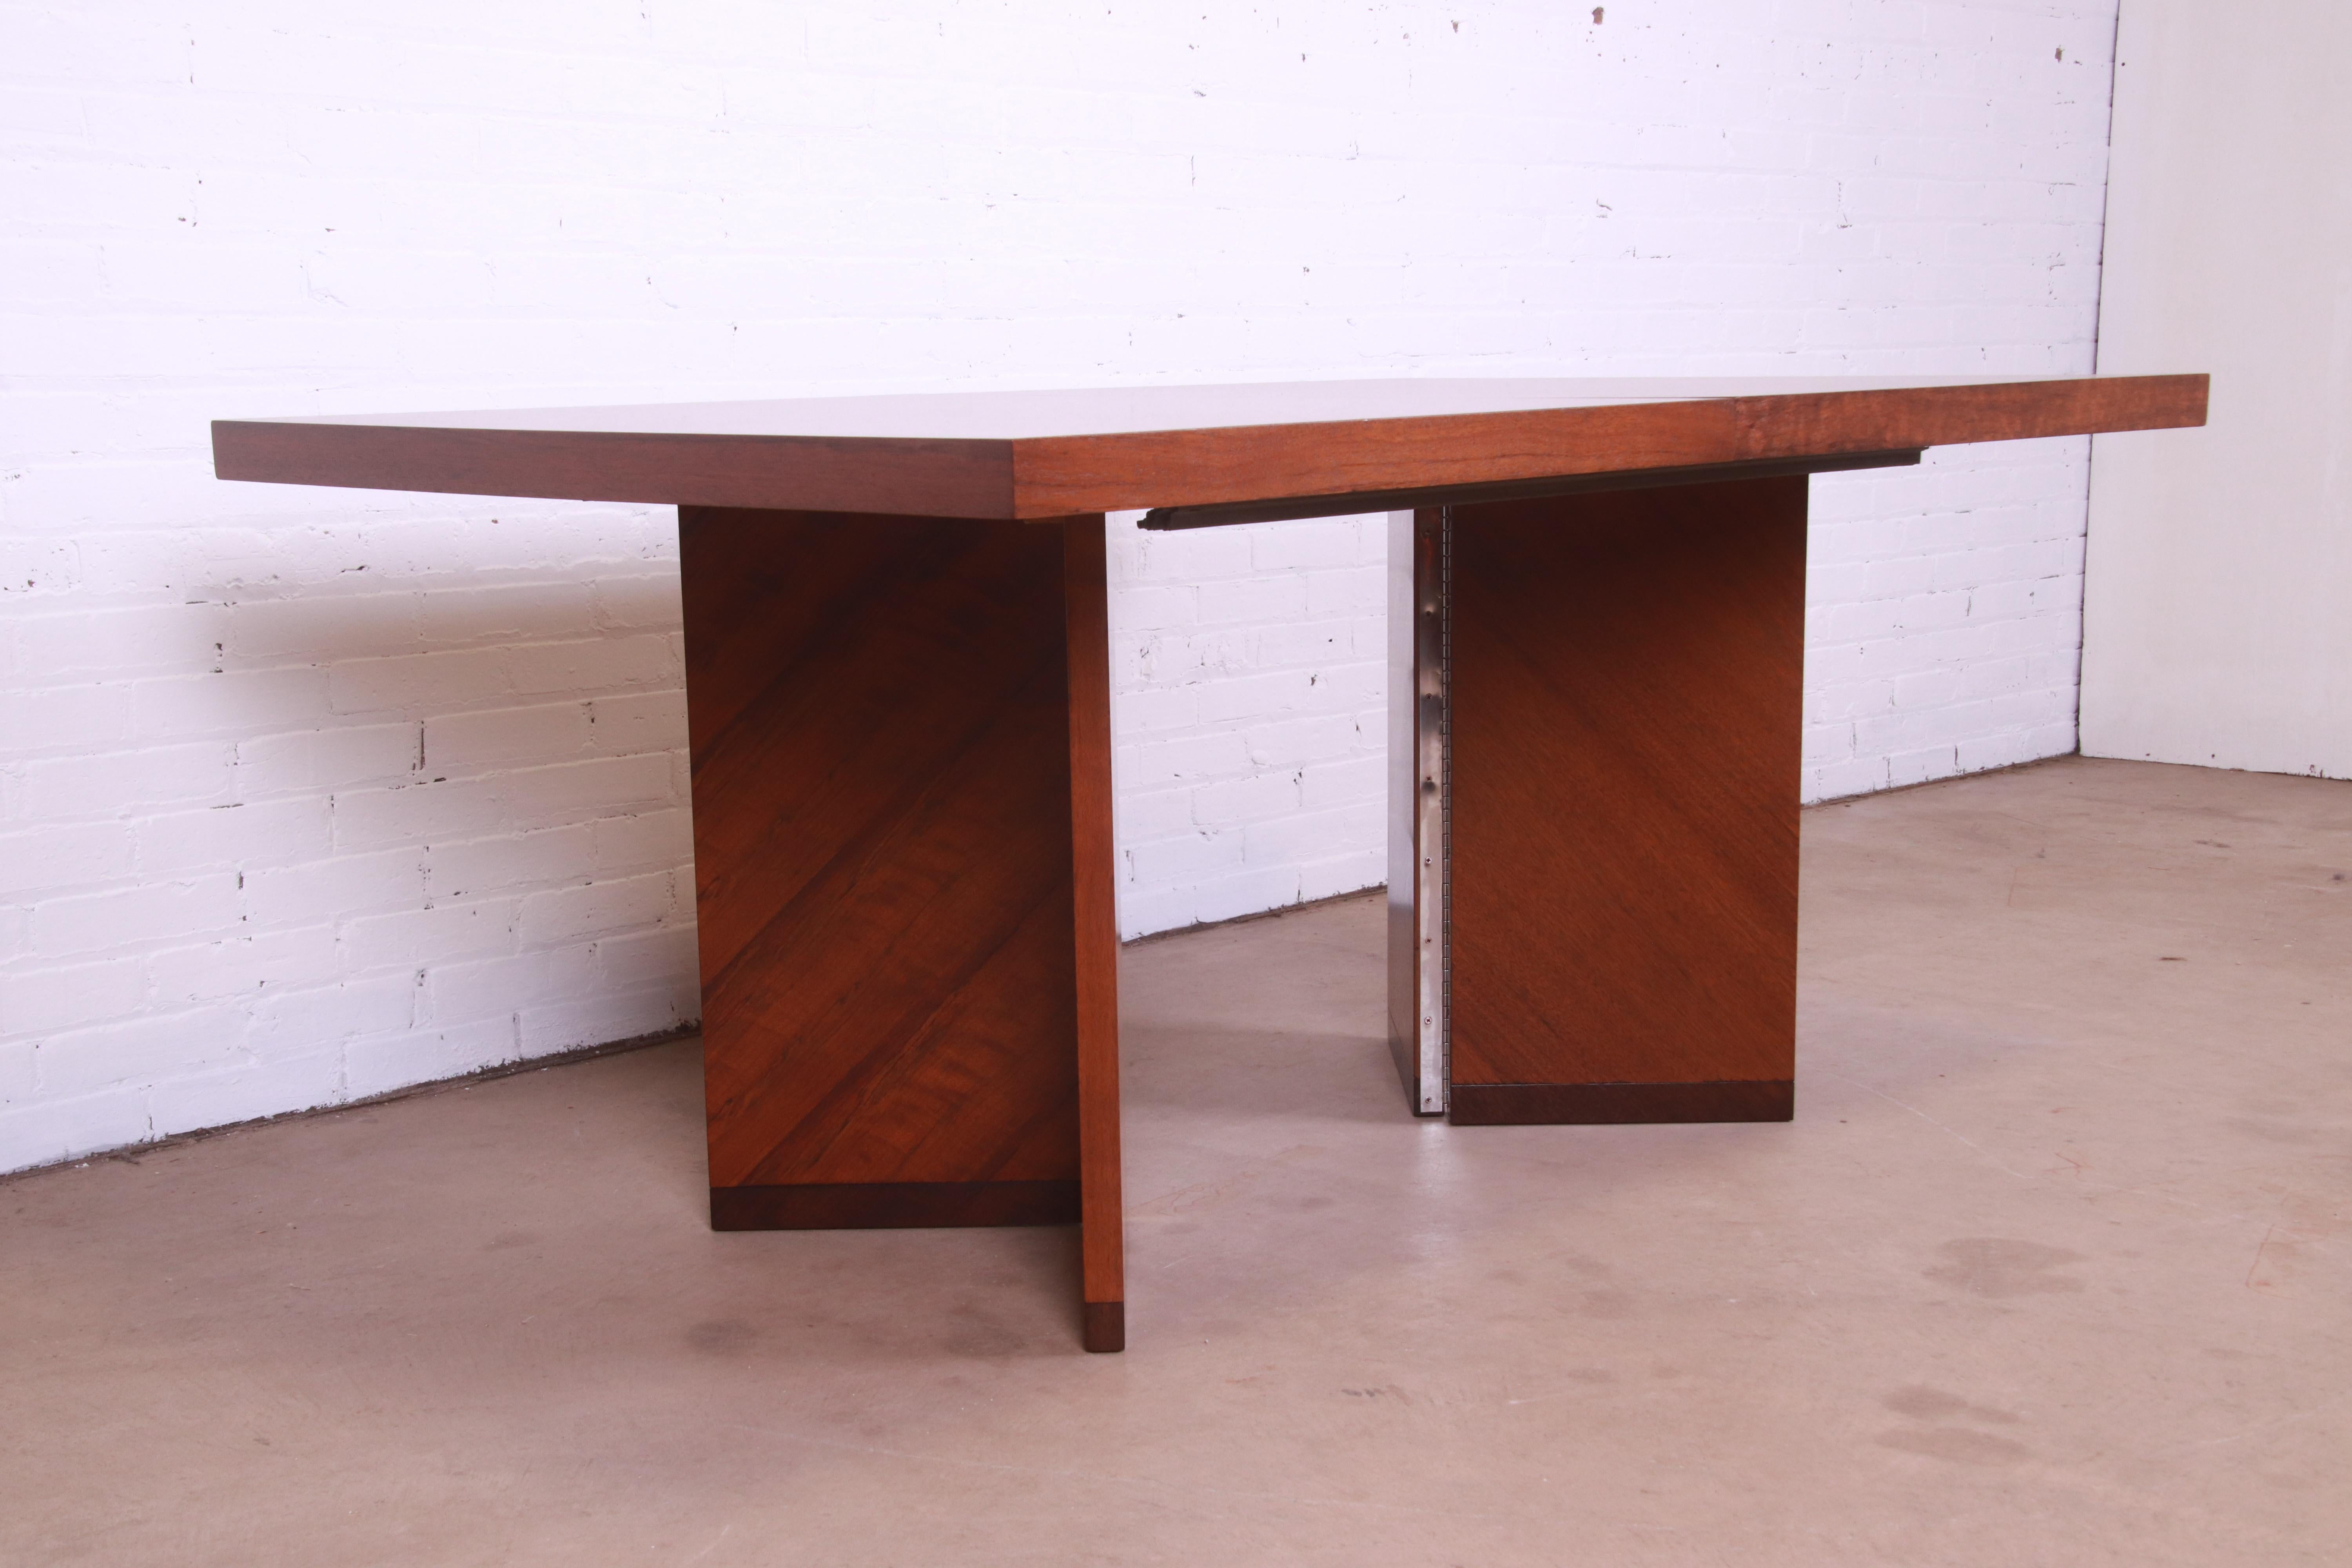 Late 20th Century Lane Mid-Century Modern Walnut Double Pedestal Dining Table, Newly Refinished For Sale